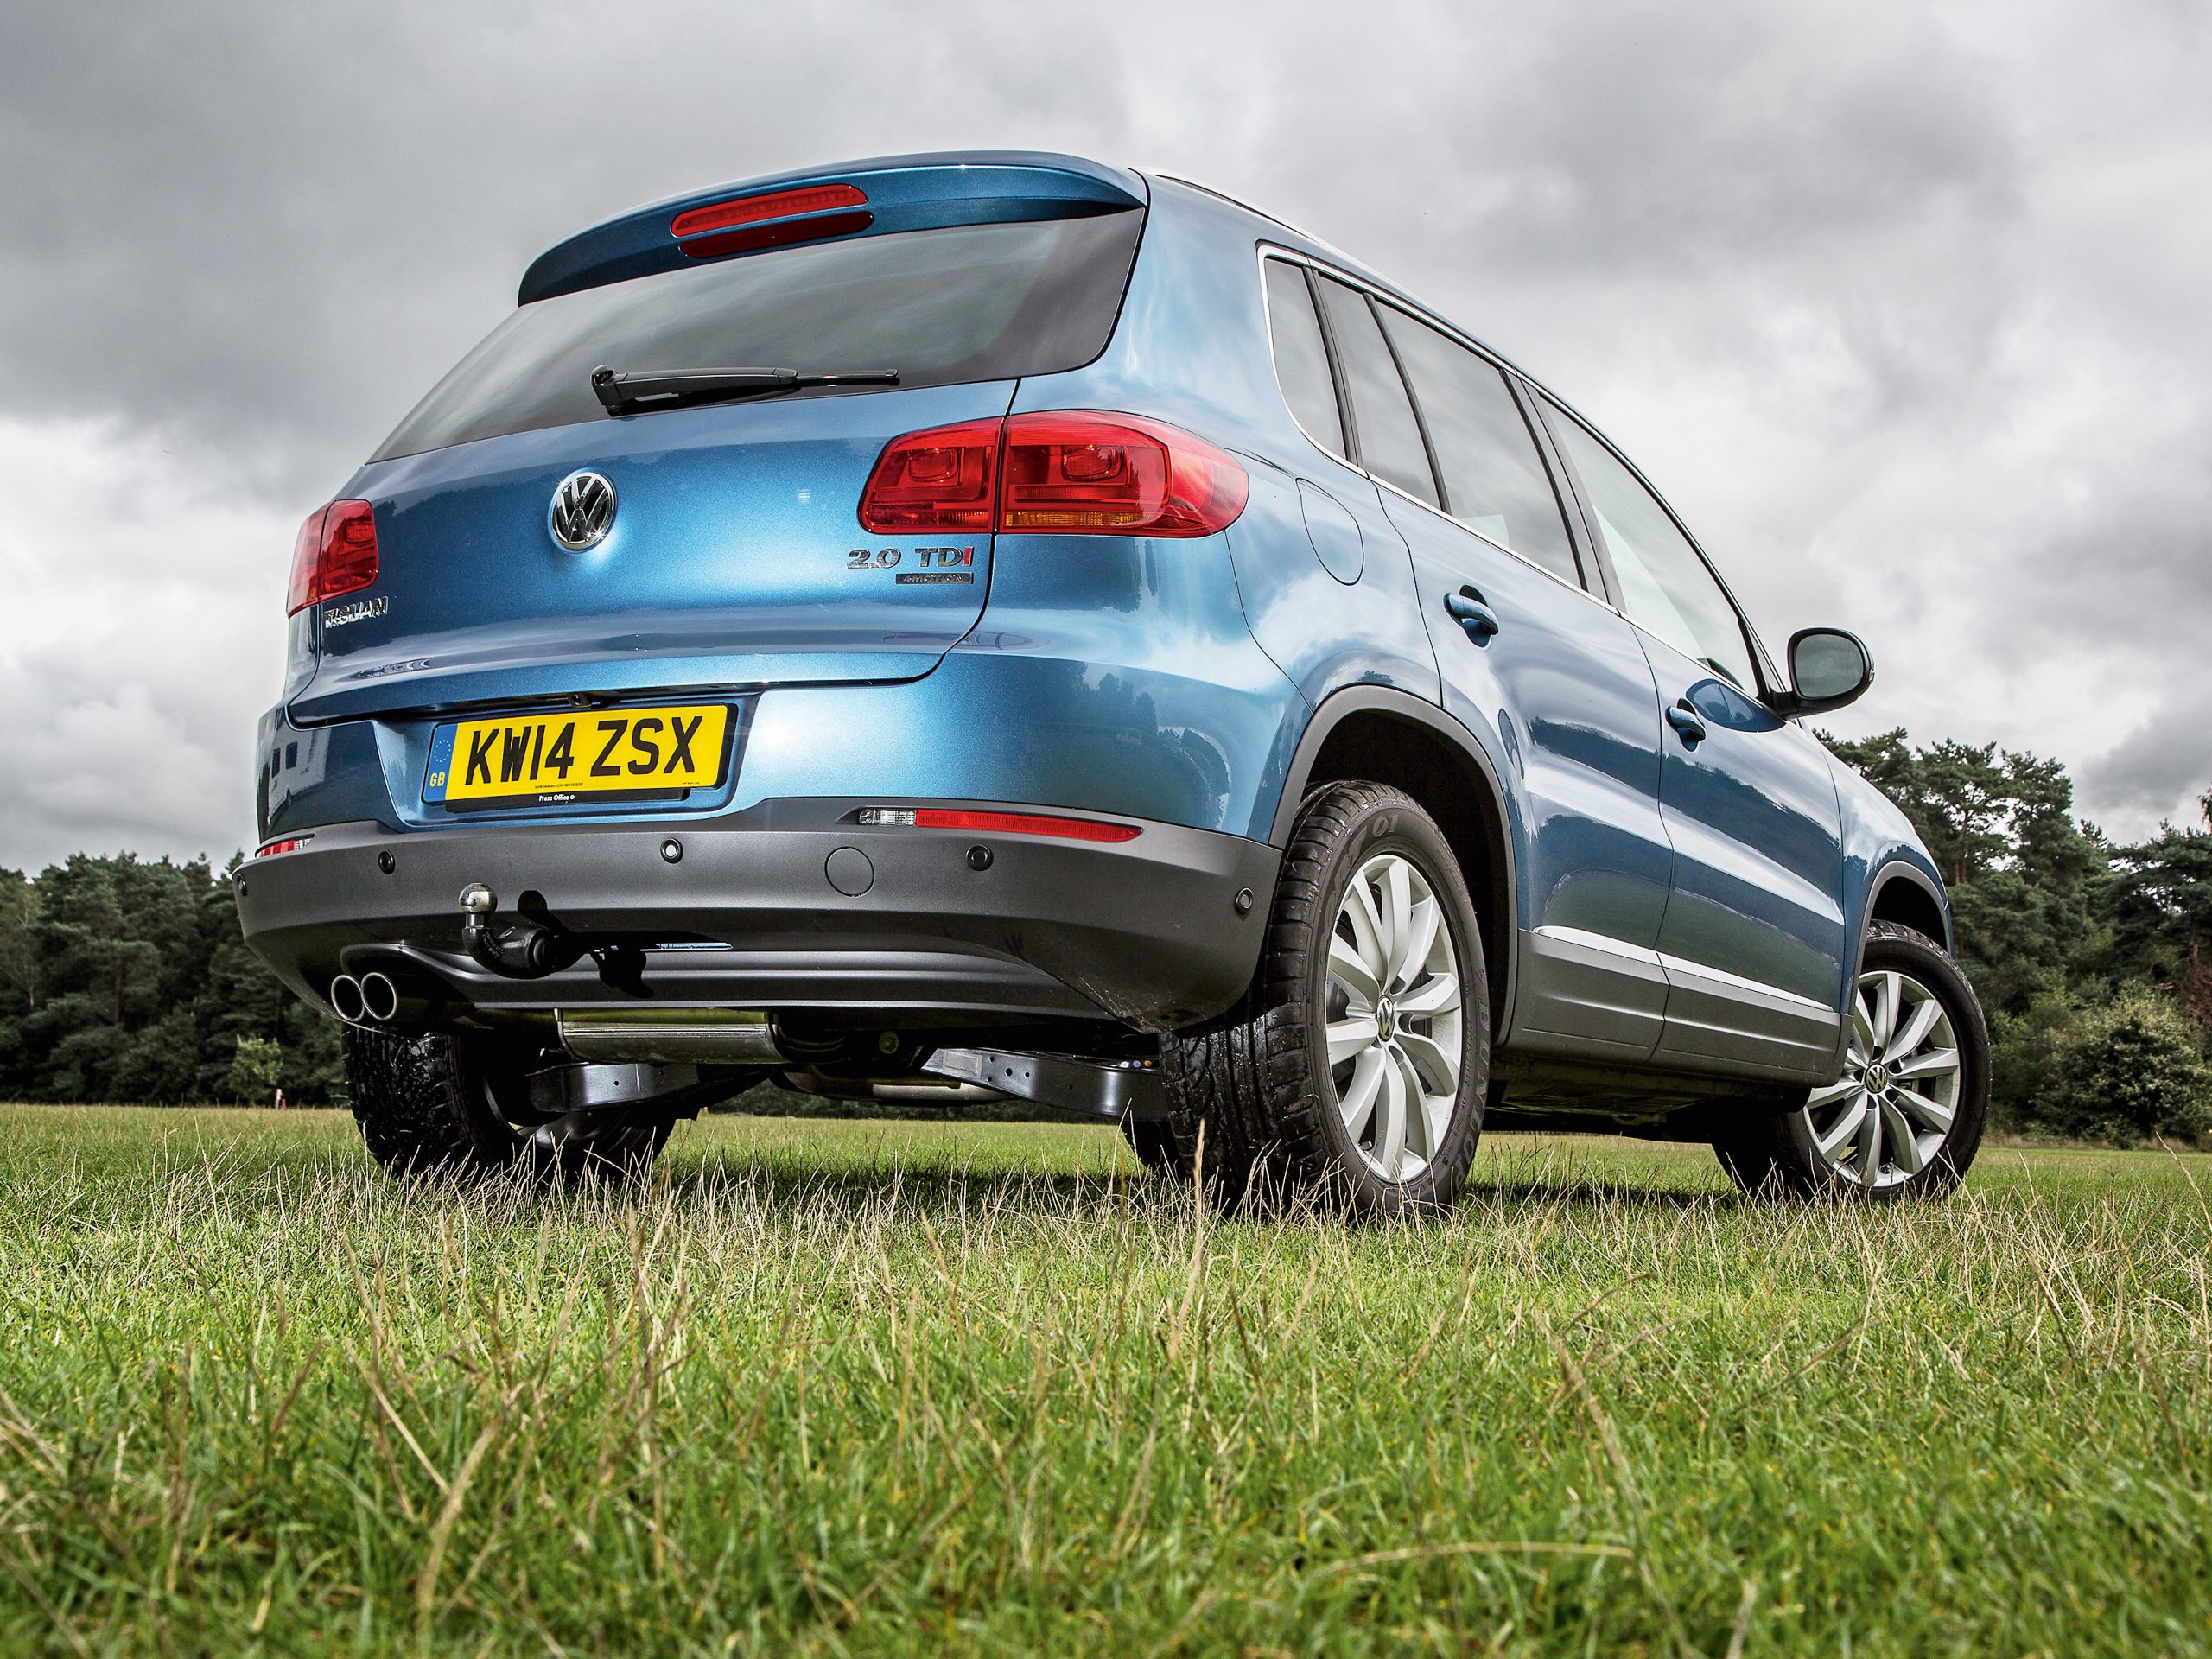 REVIEW  VW Tiguan R-Line 2.0 TDI is pleasant, but there are more